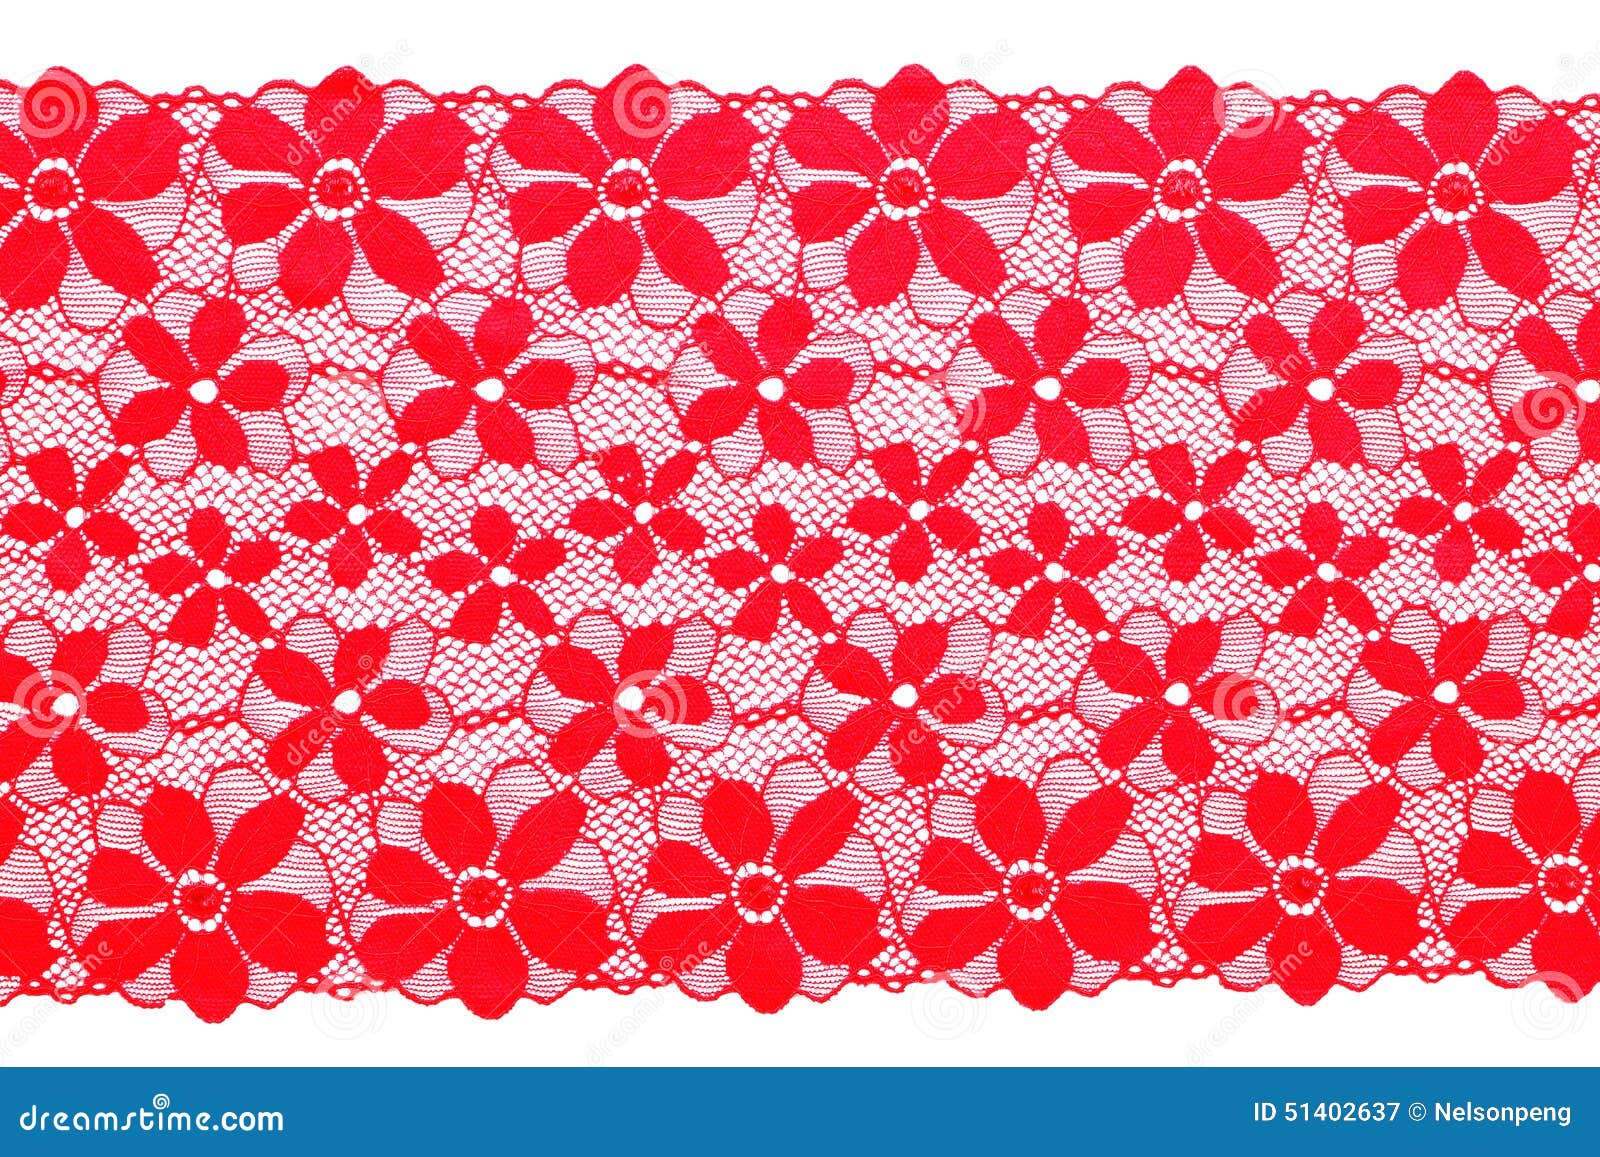 Red lace stock image. Image netting, white, thread 51402637